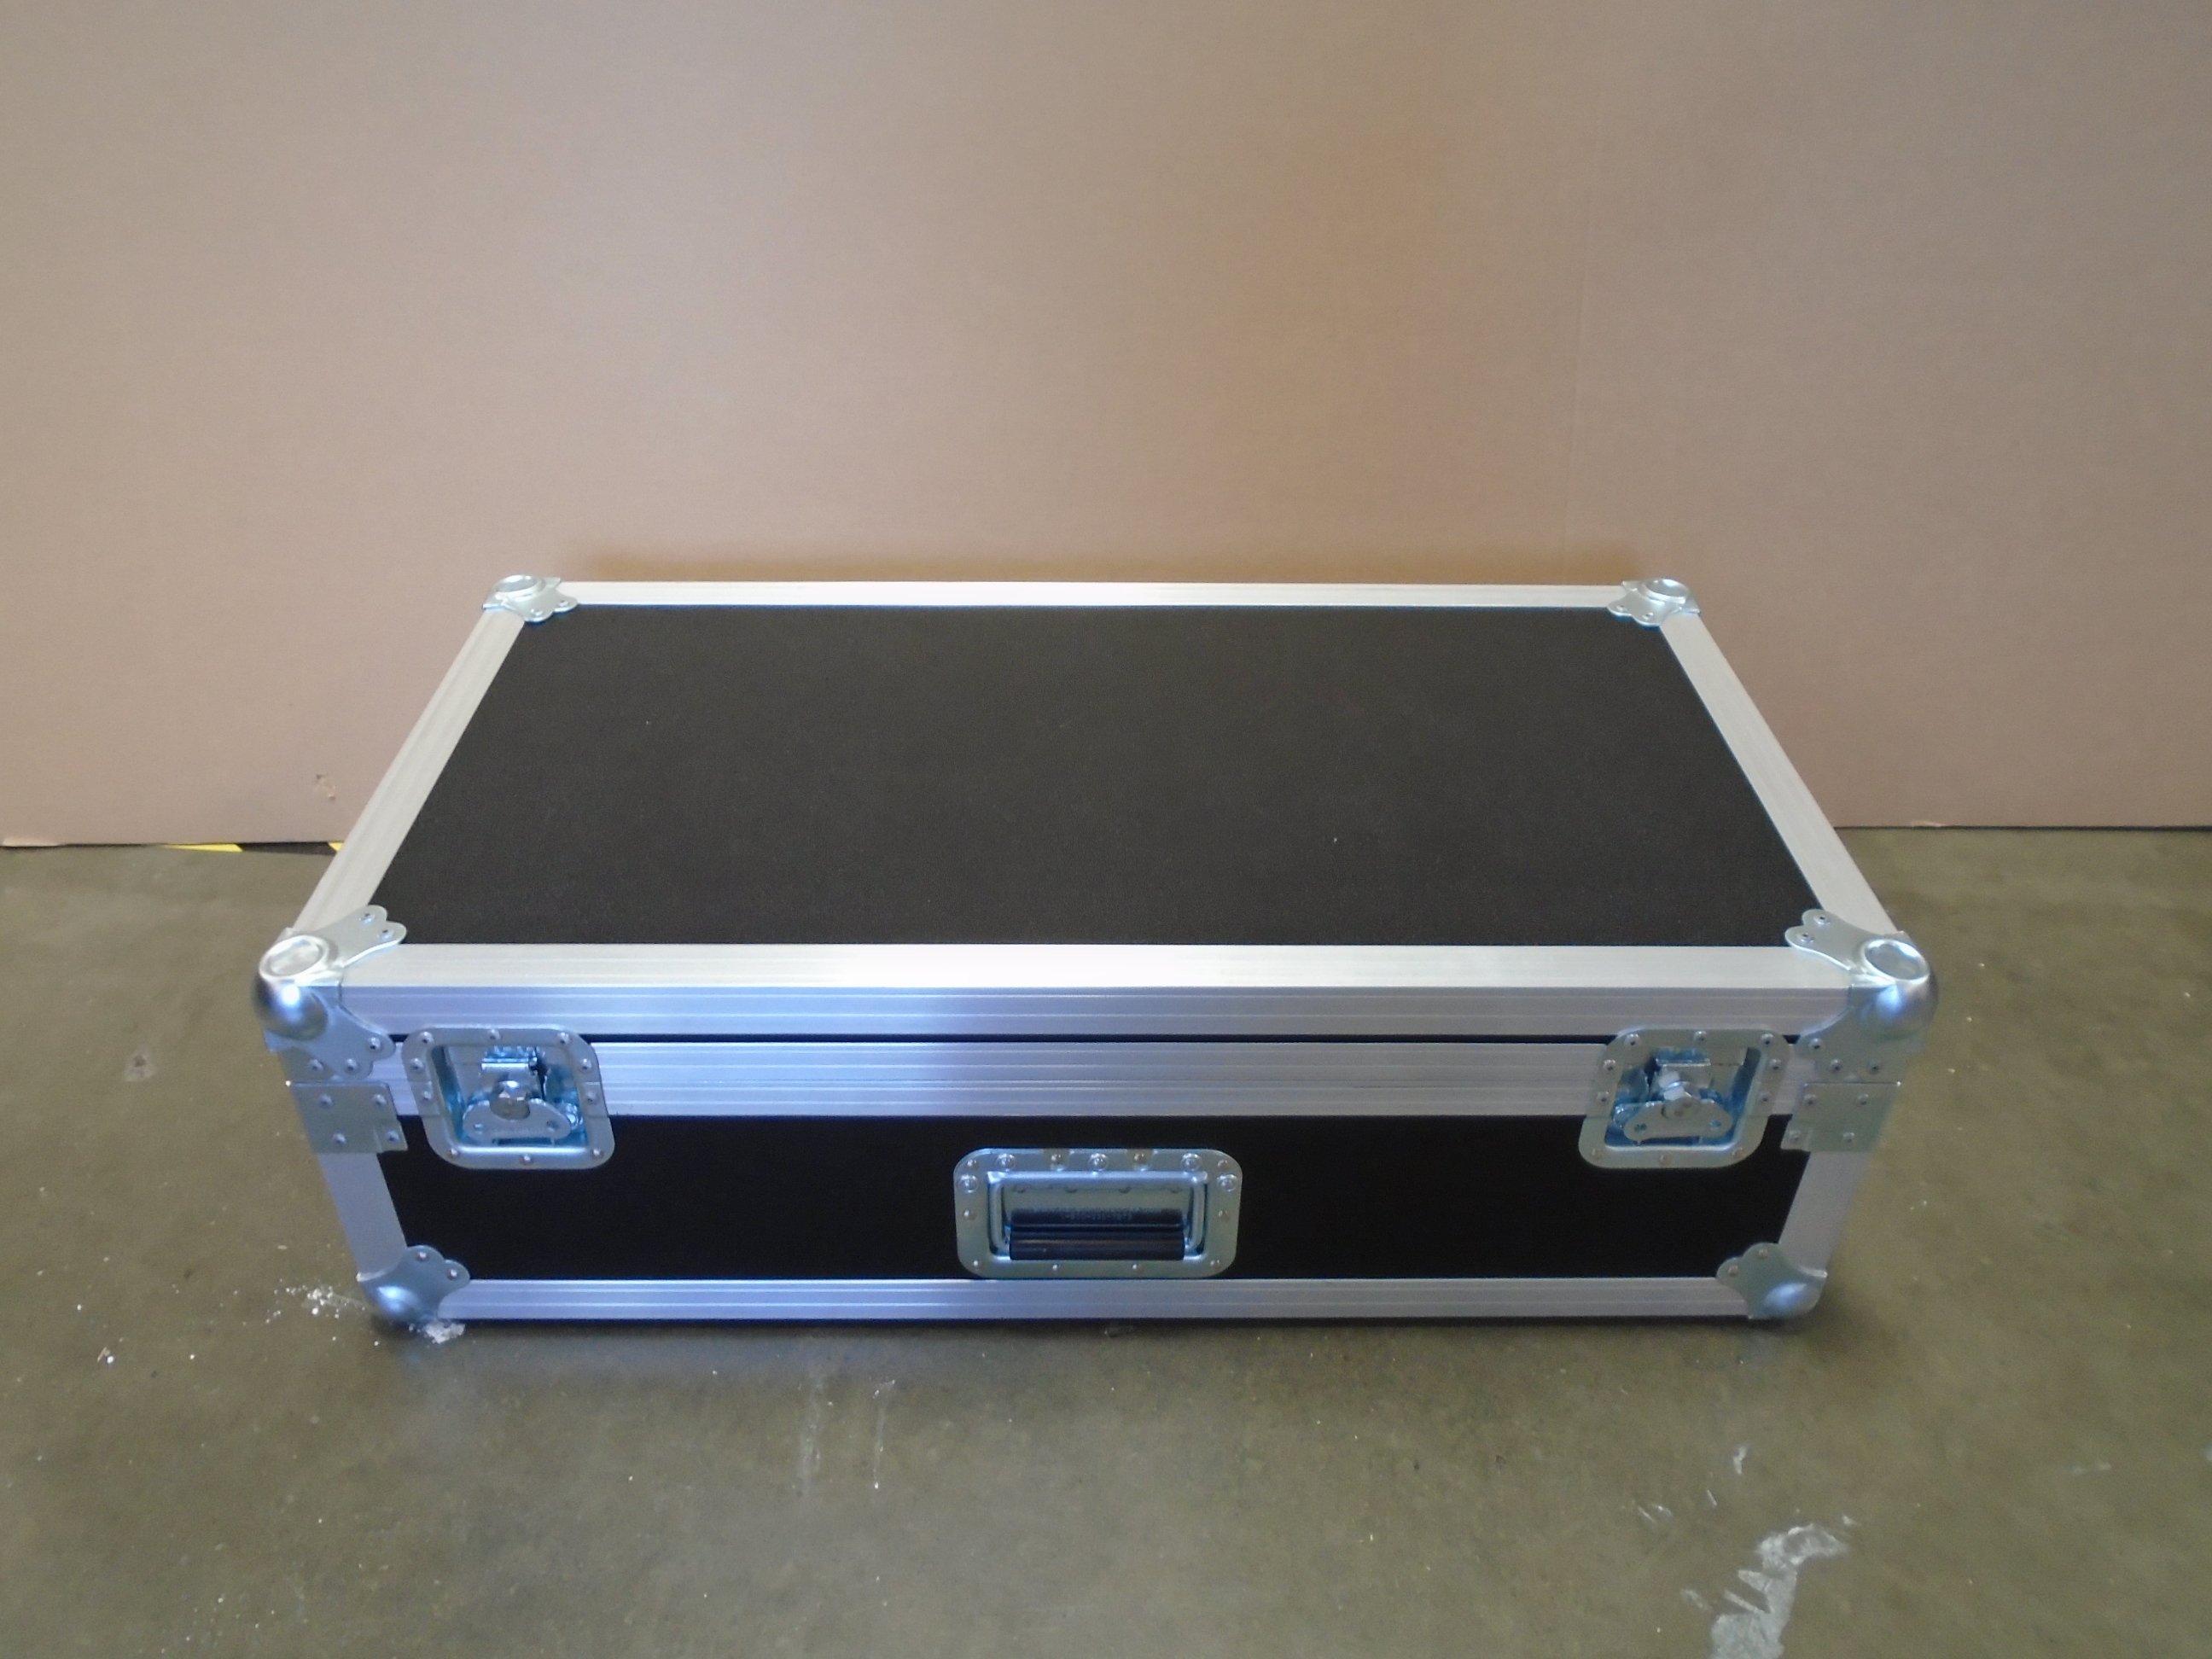 Print # 7993 - Custom Road Case for ChamSys QuickQ 30 Lighting Console Kit By Nelson Case Corp